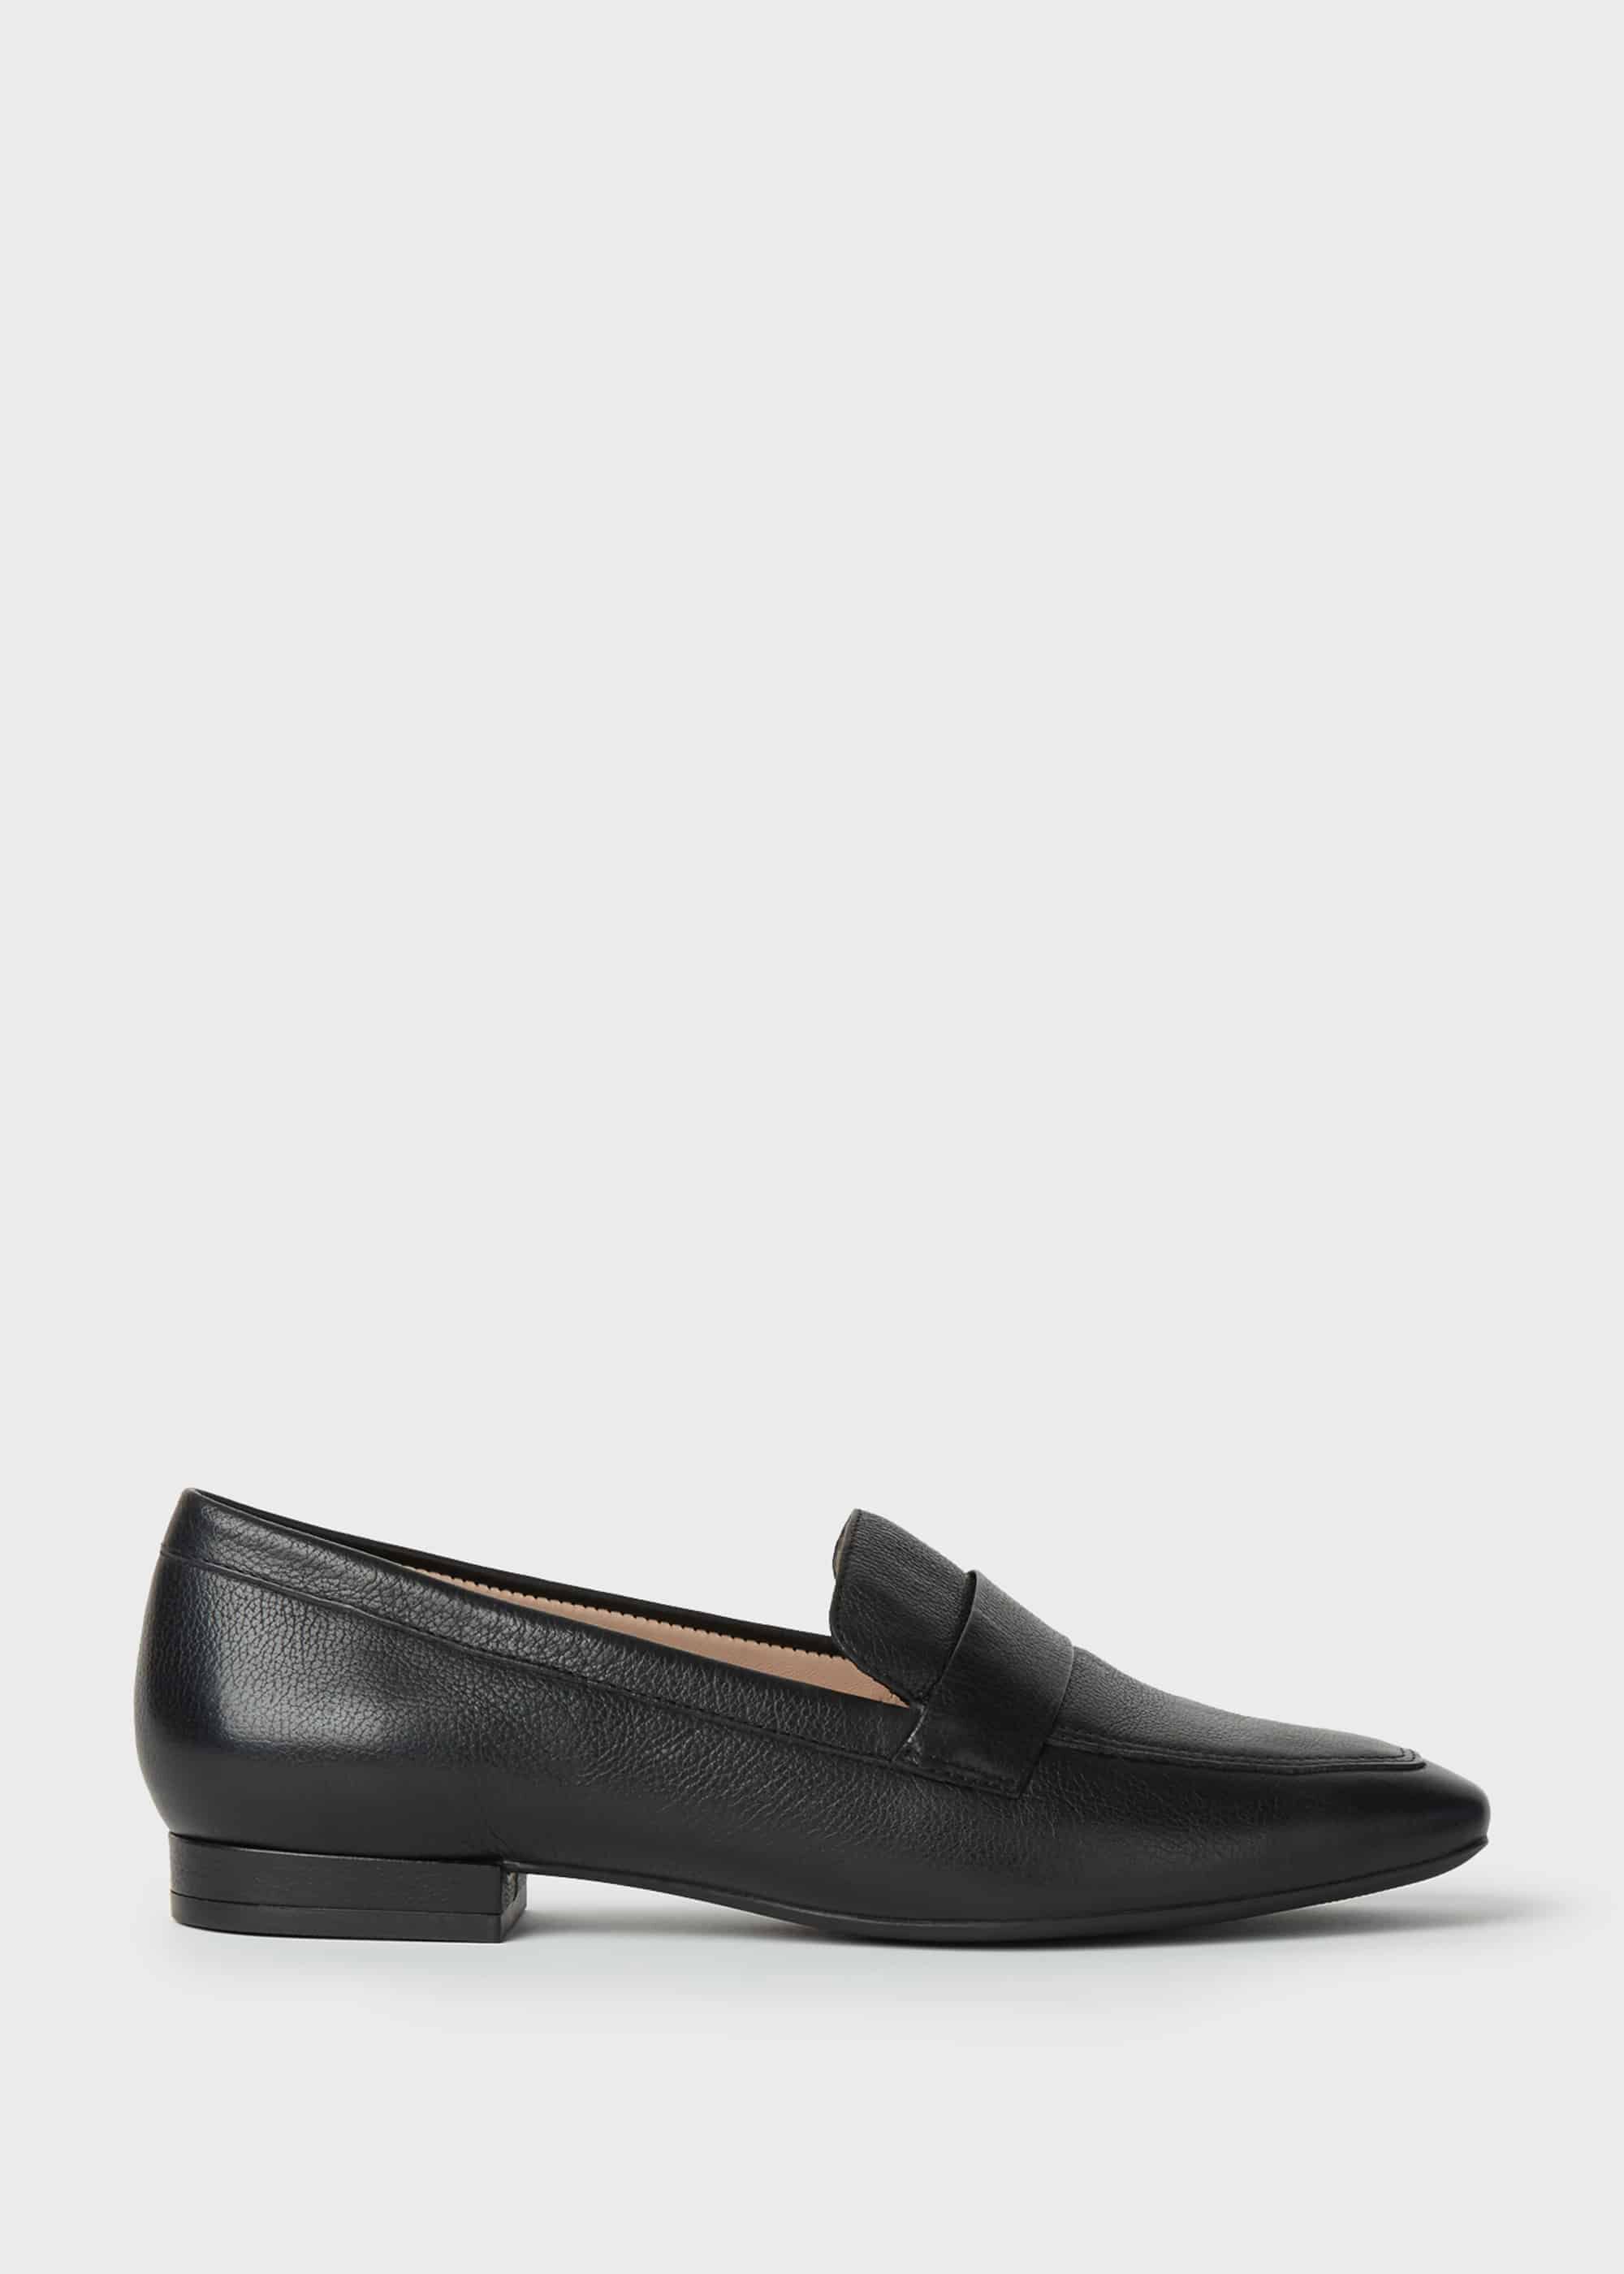 Lucy Leather Moccasins | Hobbs